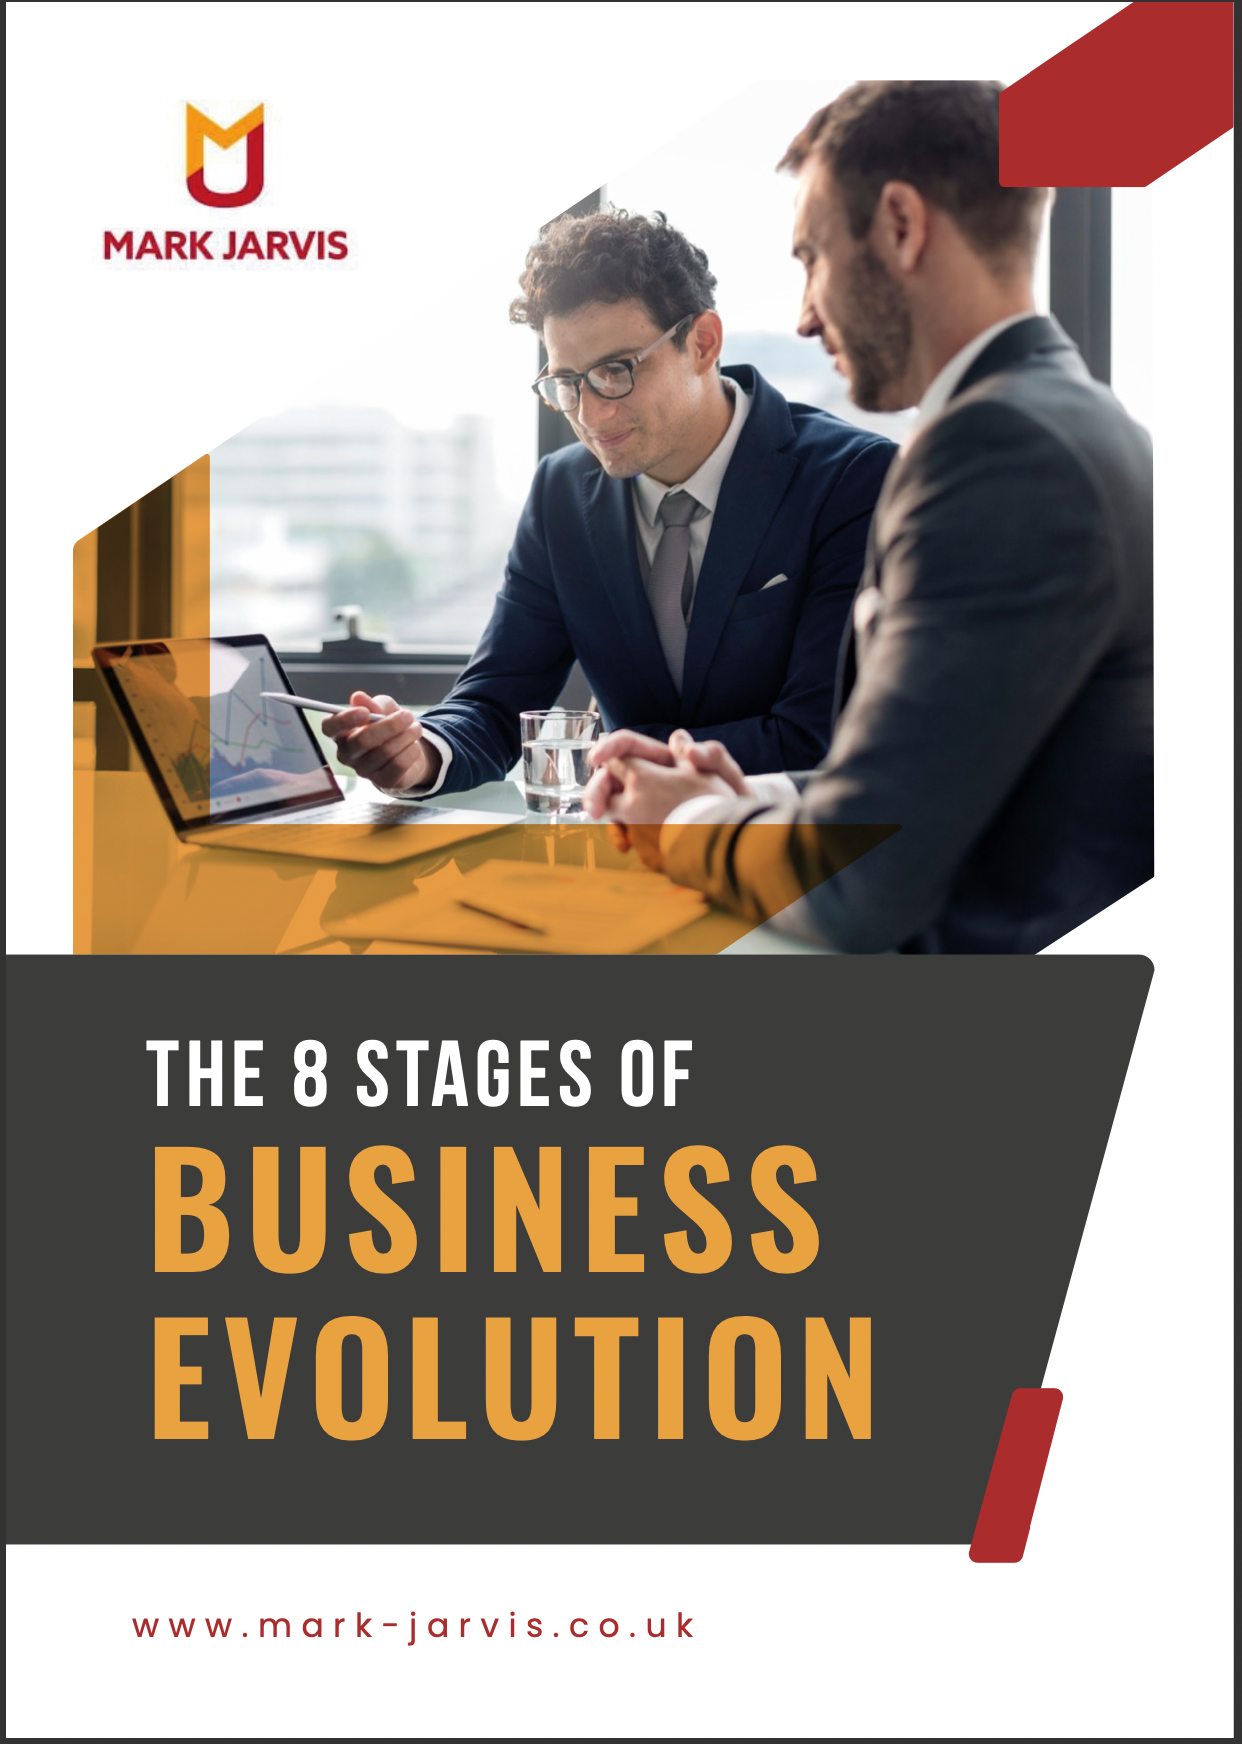 The 8 Stages of Business Evolution